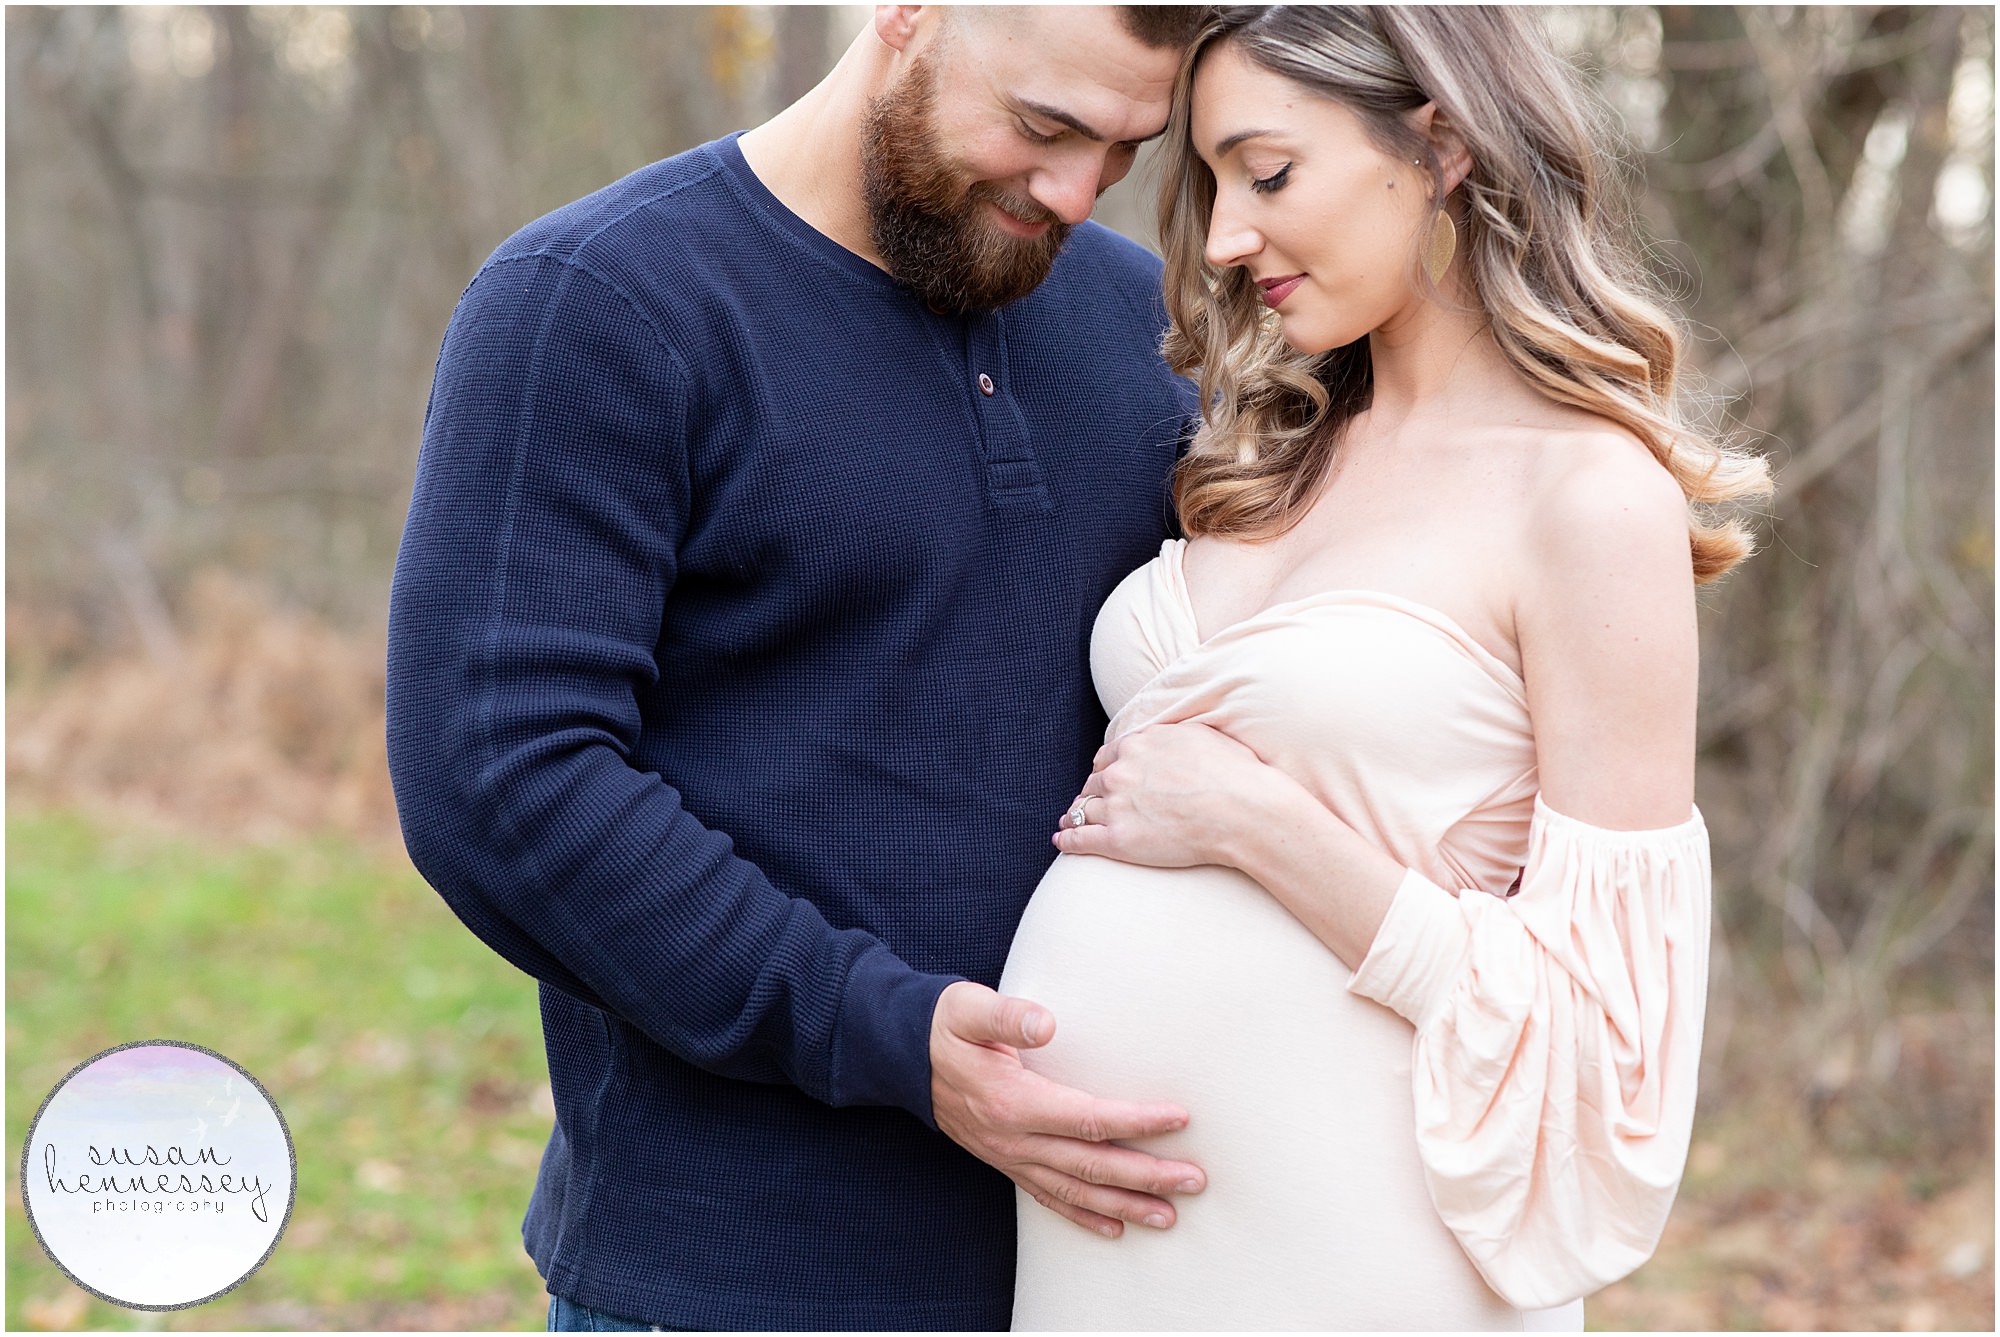 Susan Hennessey Photography is a South Jersey based photographer who offers a bump to baby collection for parents looking for a maternity and newborn session.